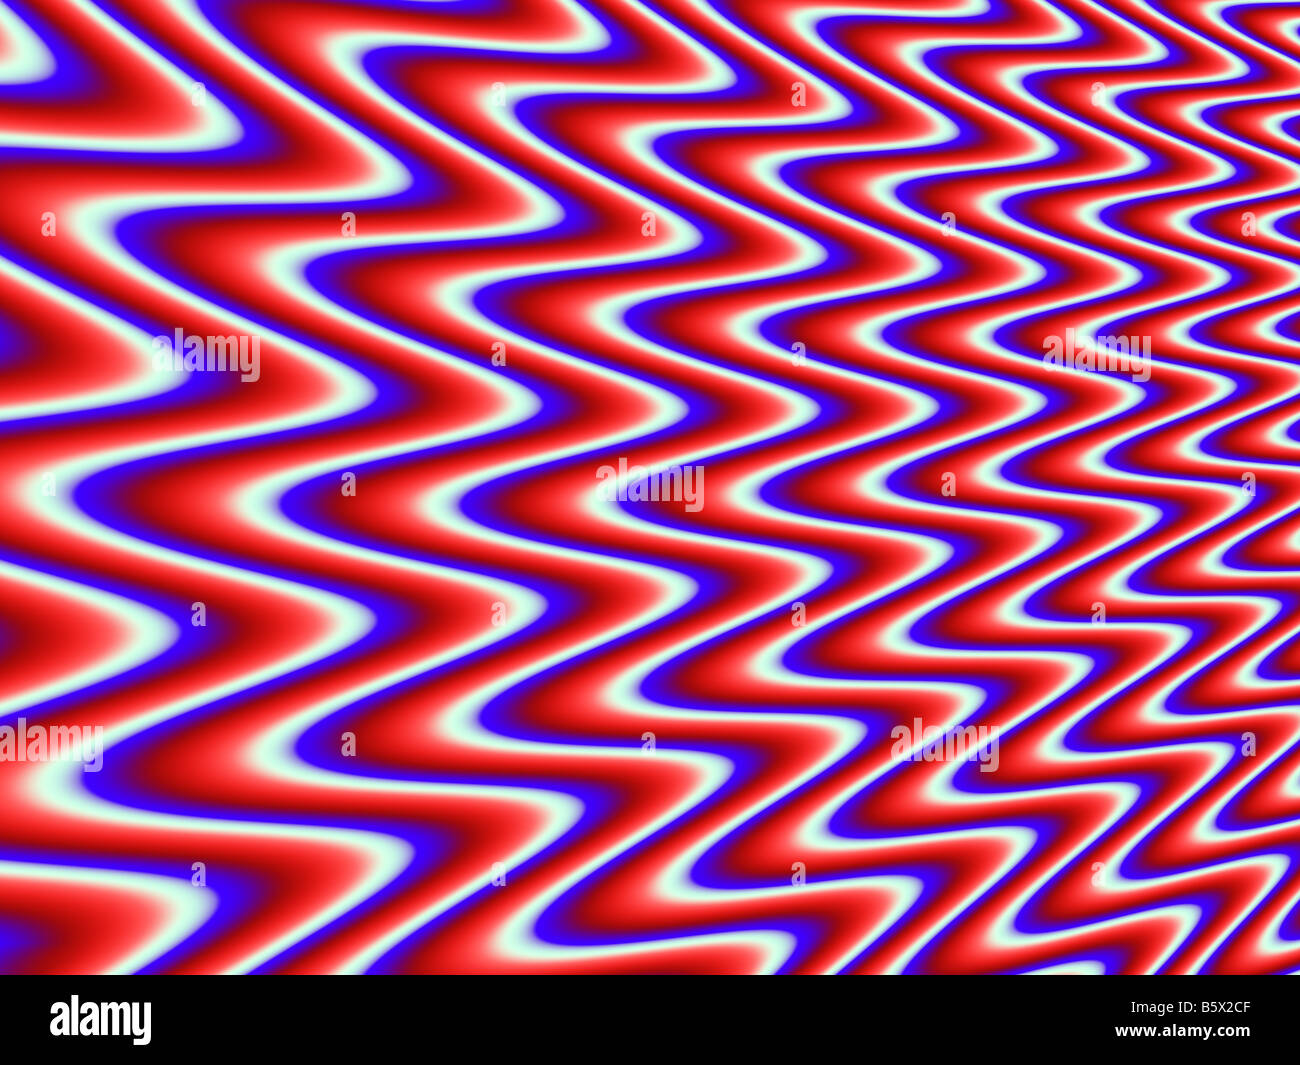 Psychedelic background with red white and blue ripples Fractal with smooth gradients between the three colors Stock Photo